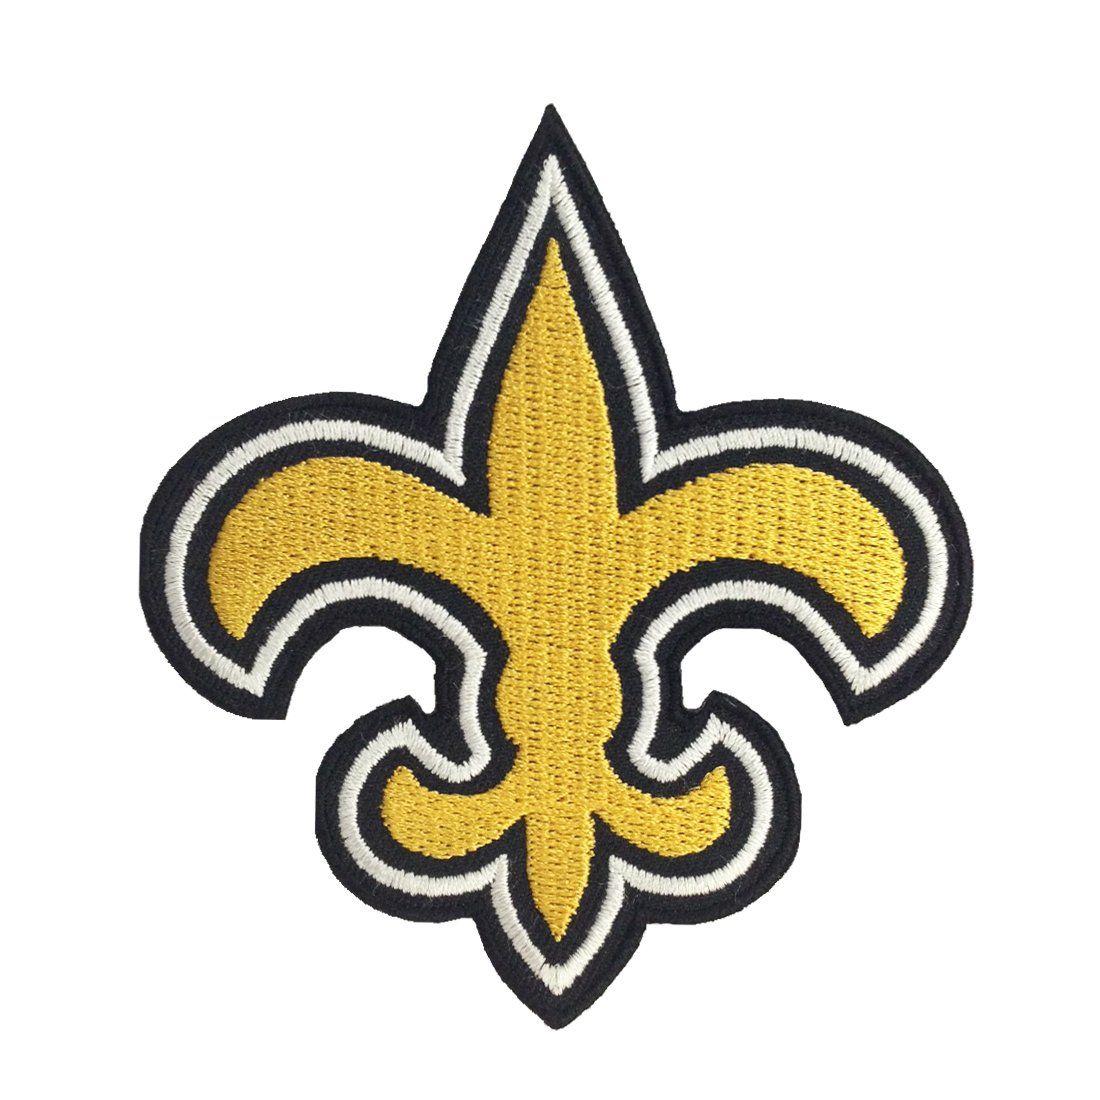 New Orleans Logo - X New Orleans Saints Logo I Embroidered Iron Patches